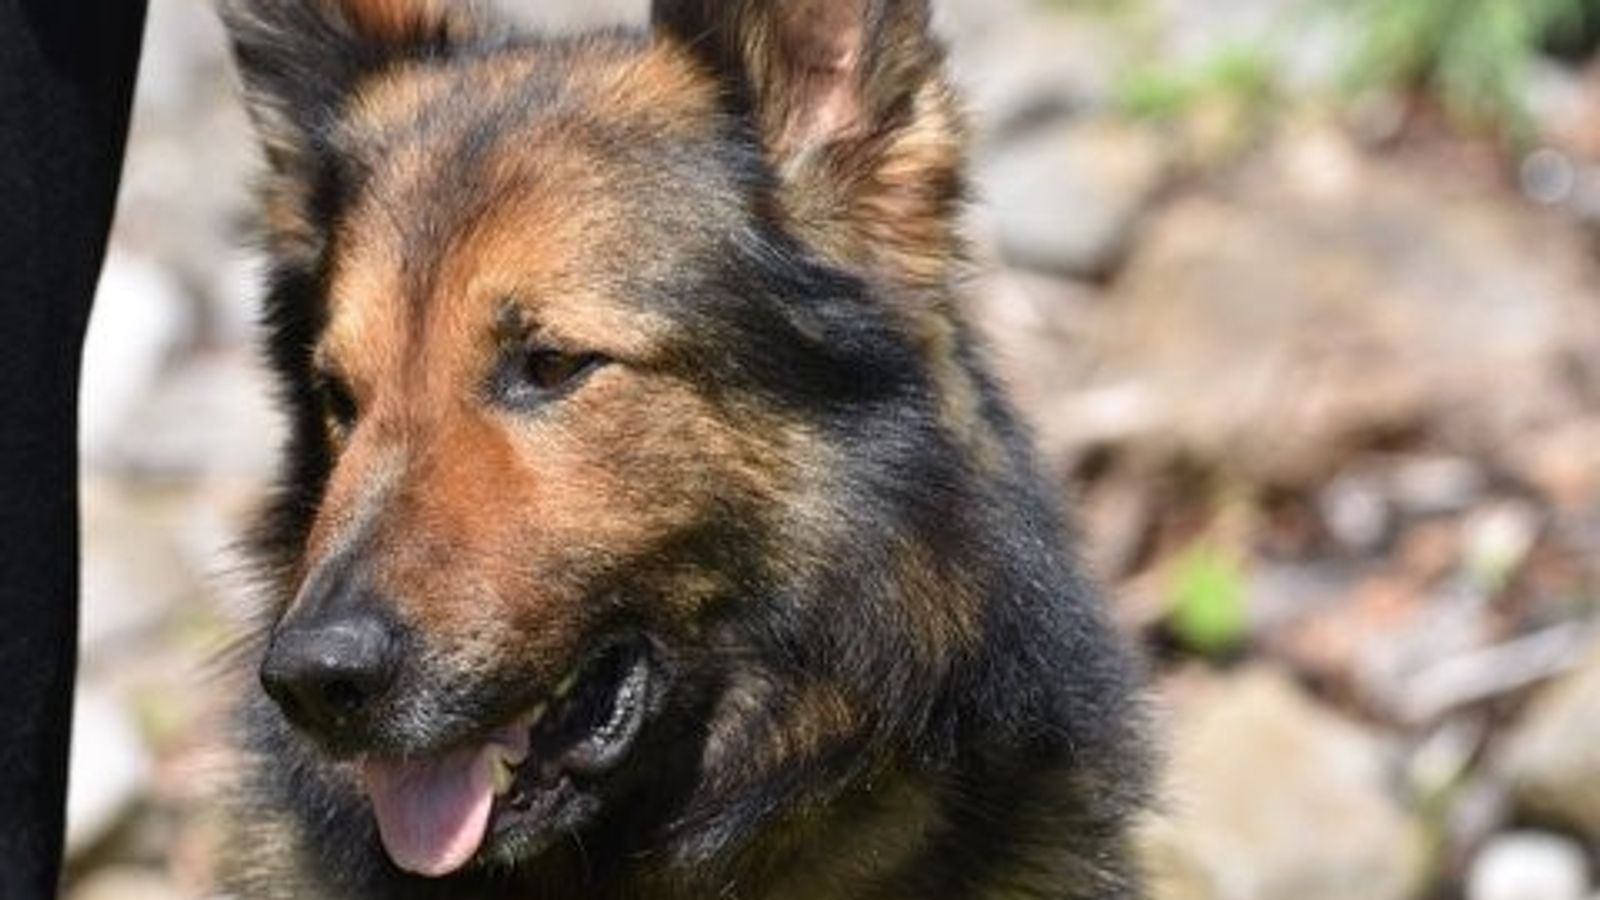 Accolade for retiring police dog Storm and his handler after heroic chase – ‘a fitting end to an illustrious career’